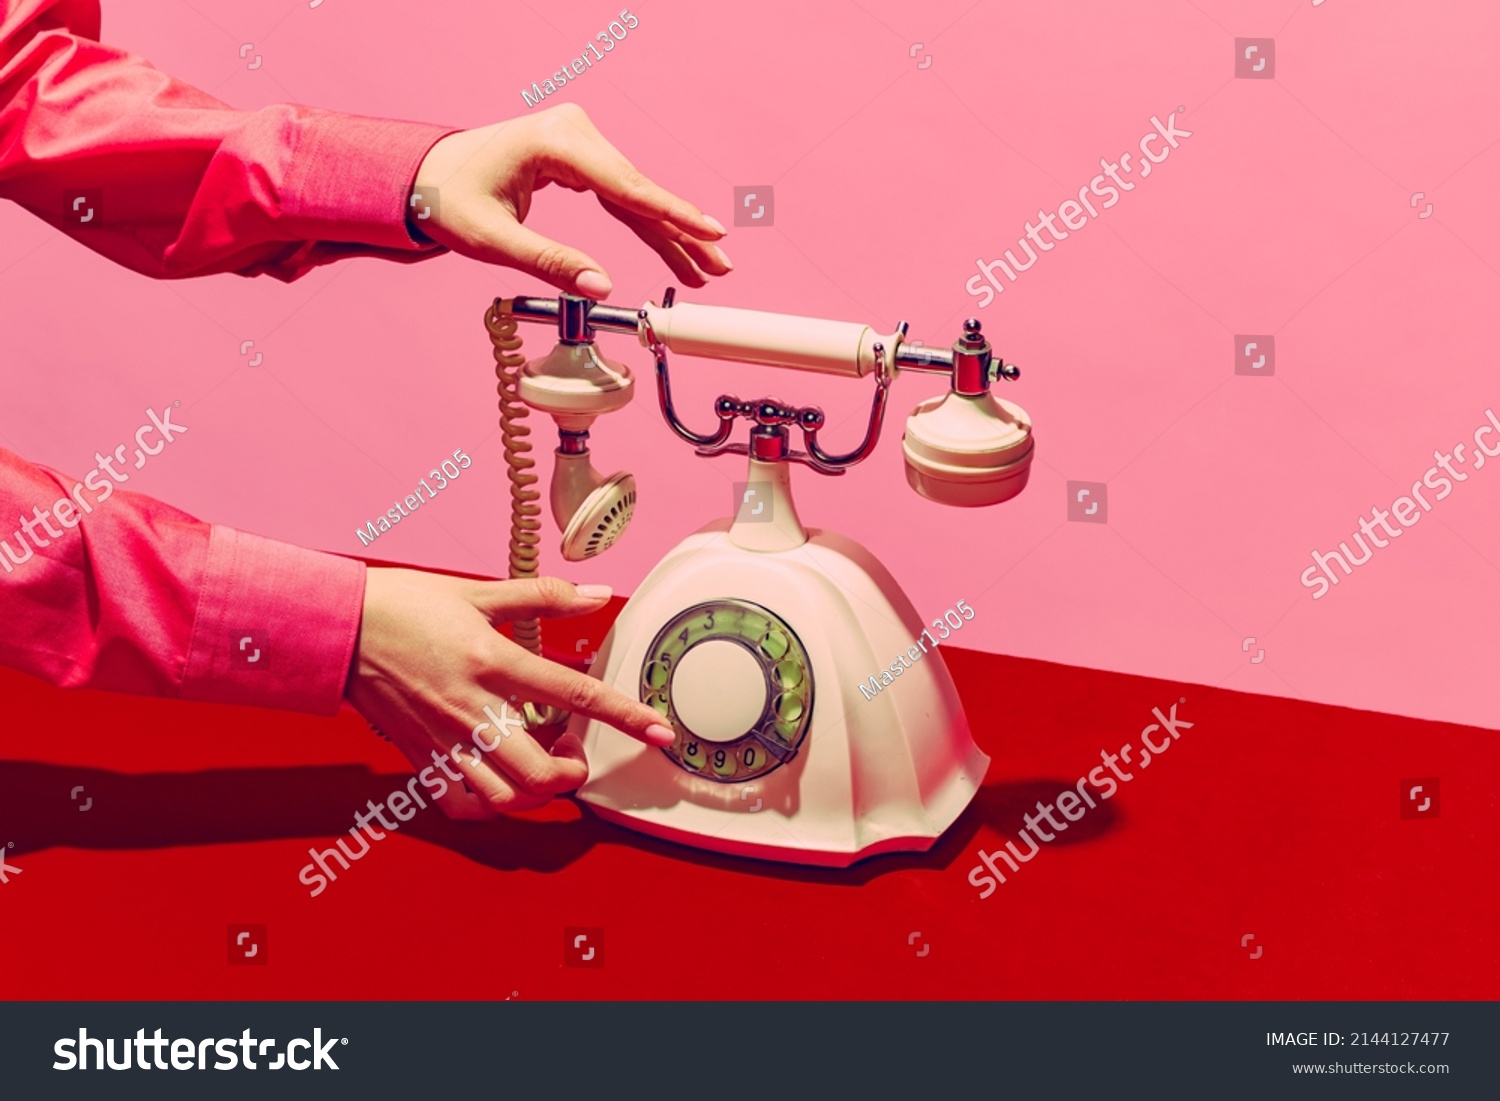 White telephone, Pop art photography. Retro objects, gadgets. Female hand holding handset of vintage phone isolated on pink and red background. Vintage, retro 80s, 70s style. Complementary colors. #2144127477